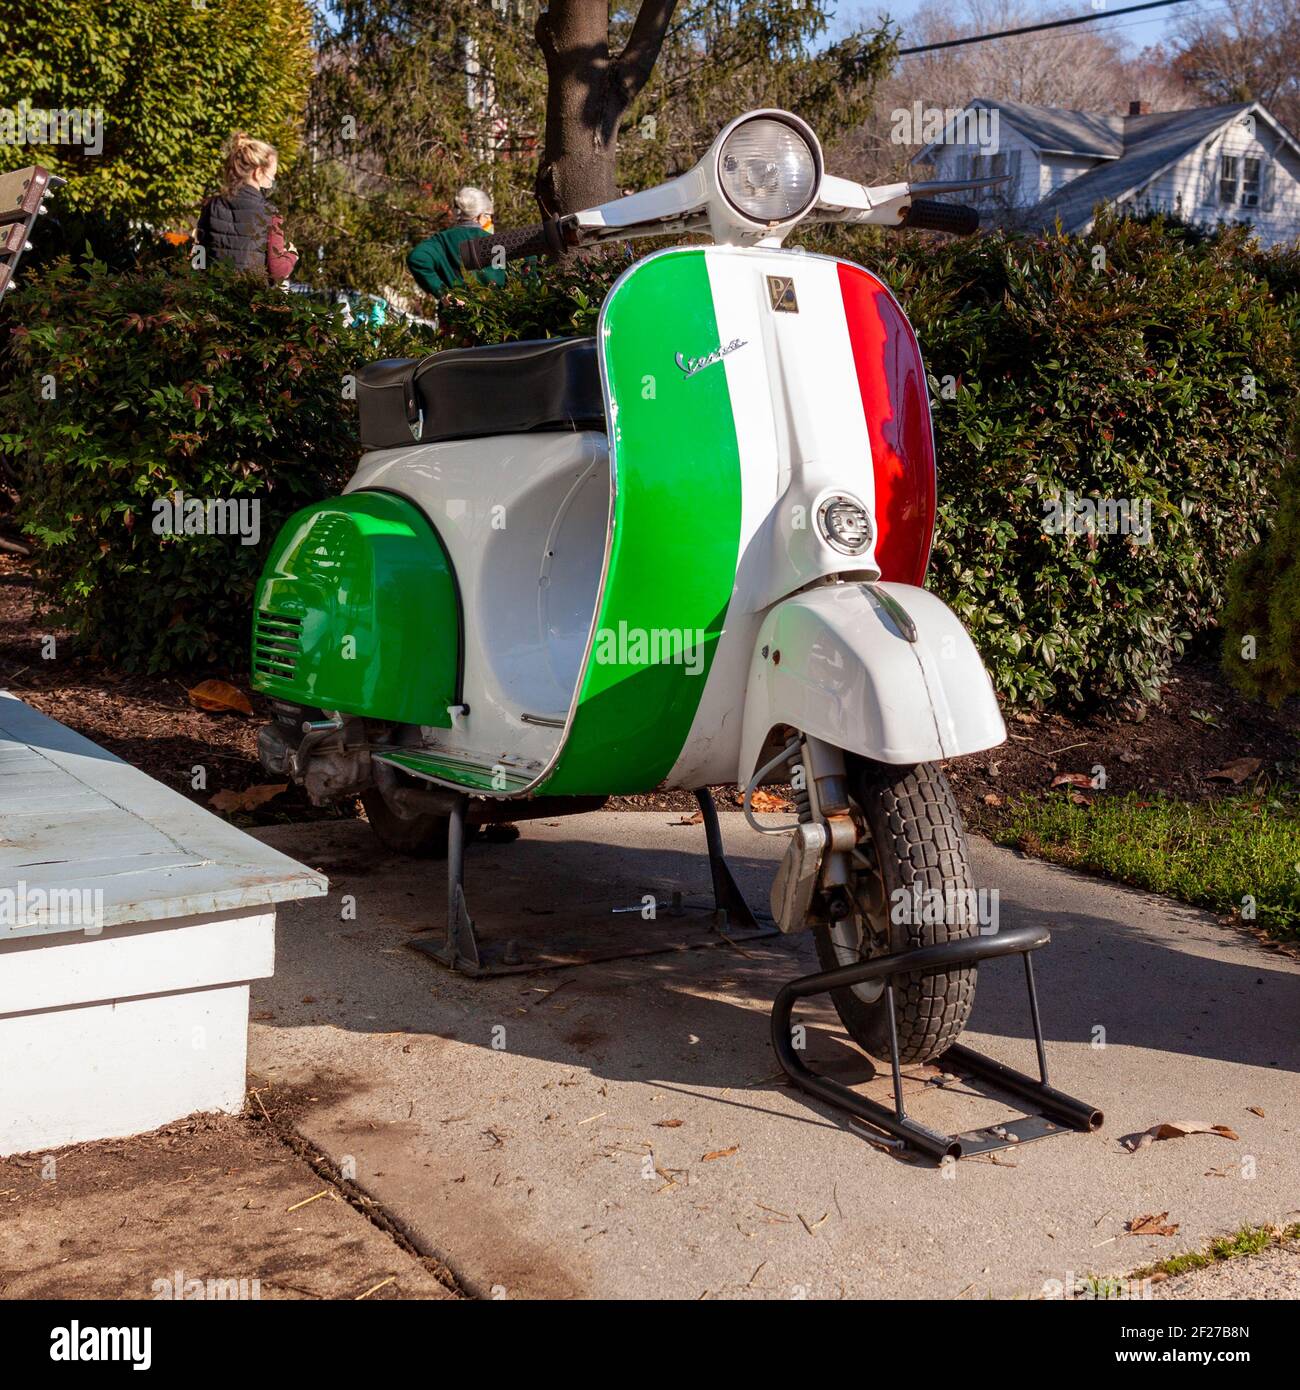 Clifton, VA, USA 11-14-2020: A Vespa scooter motorbike painted in the striped colors of Italian Flag (green, white and red) produced by Italian Piaggi Stock Photo